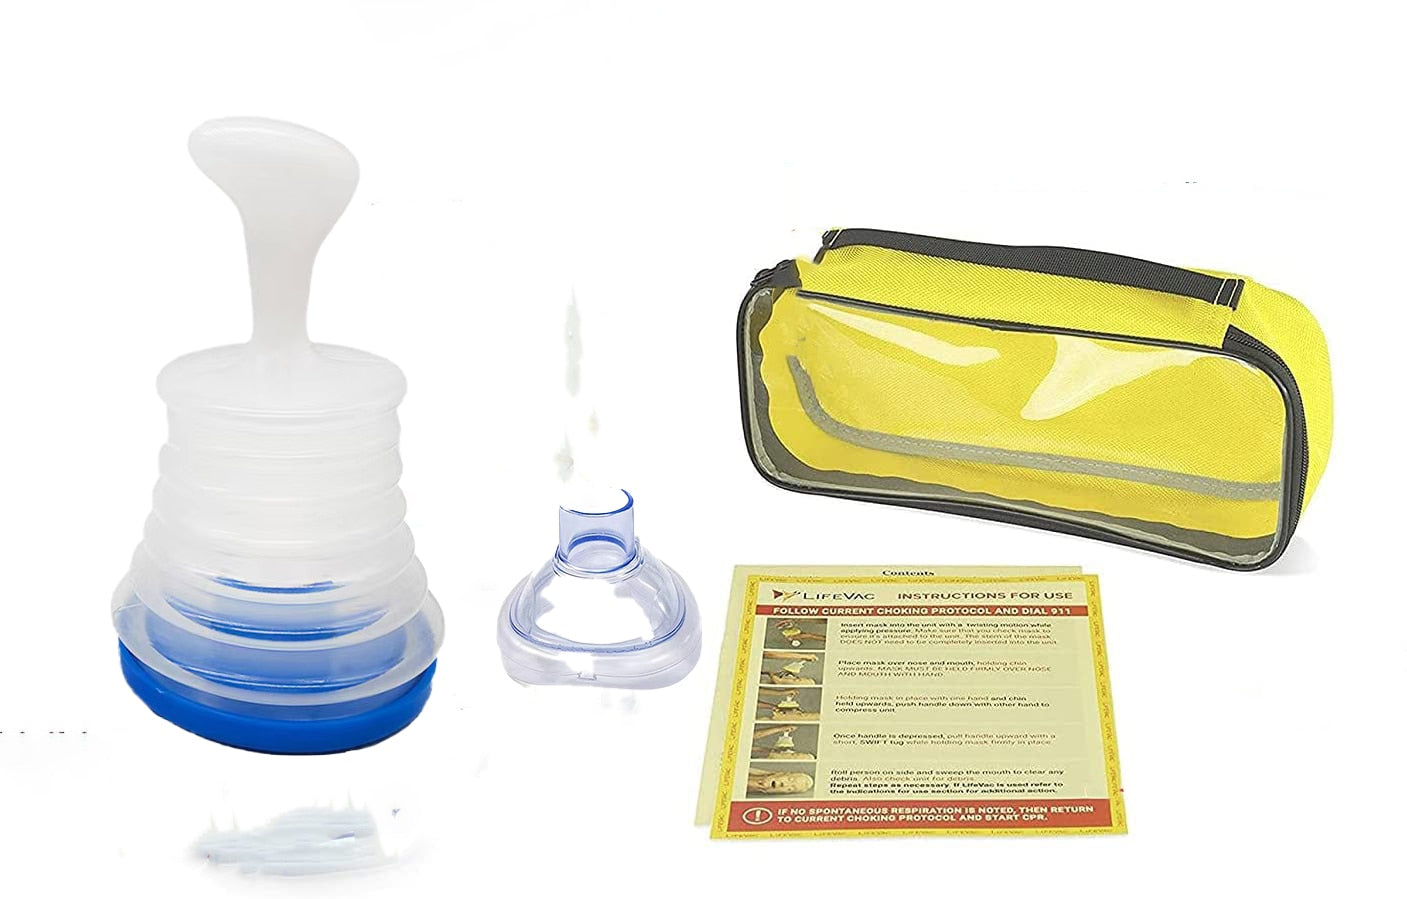 Portable Emergency CPR First Aid Choking Device